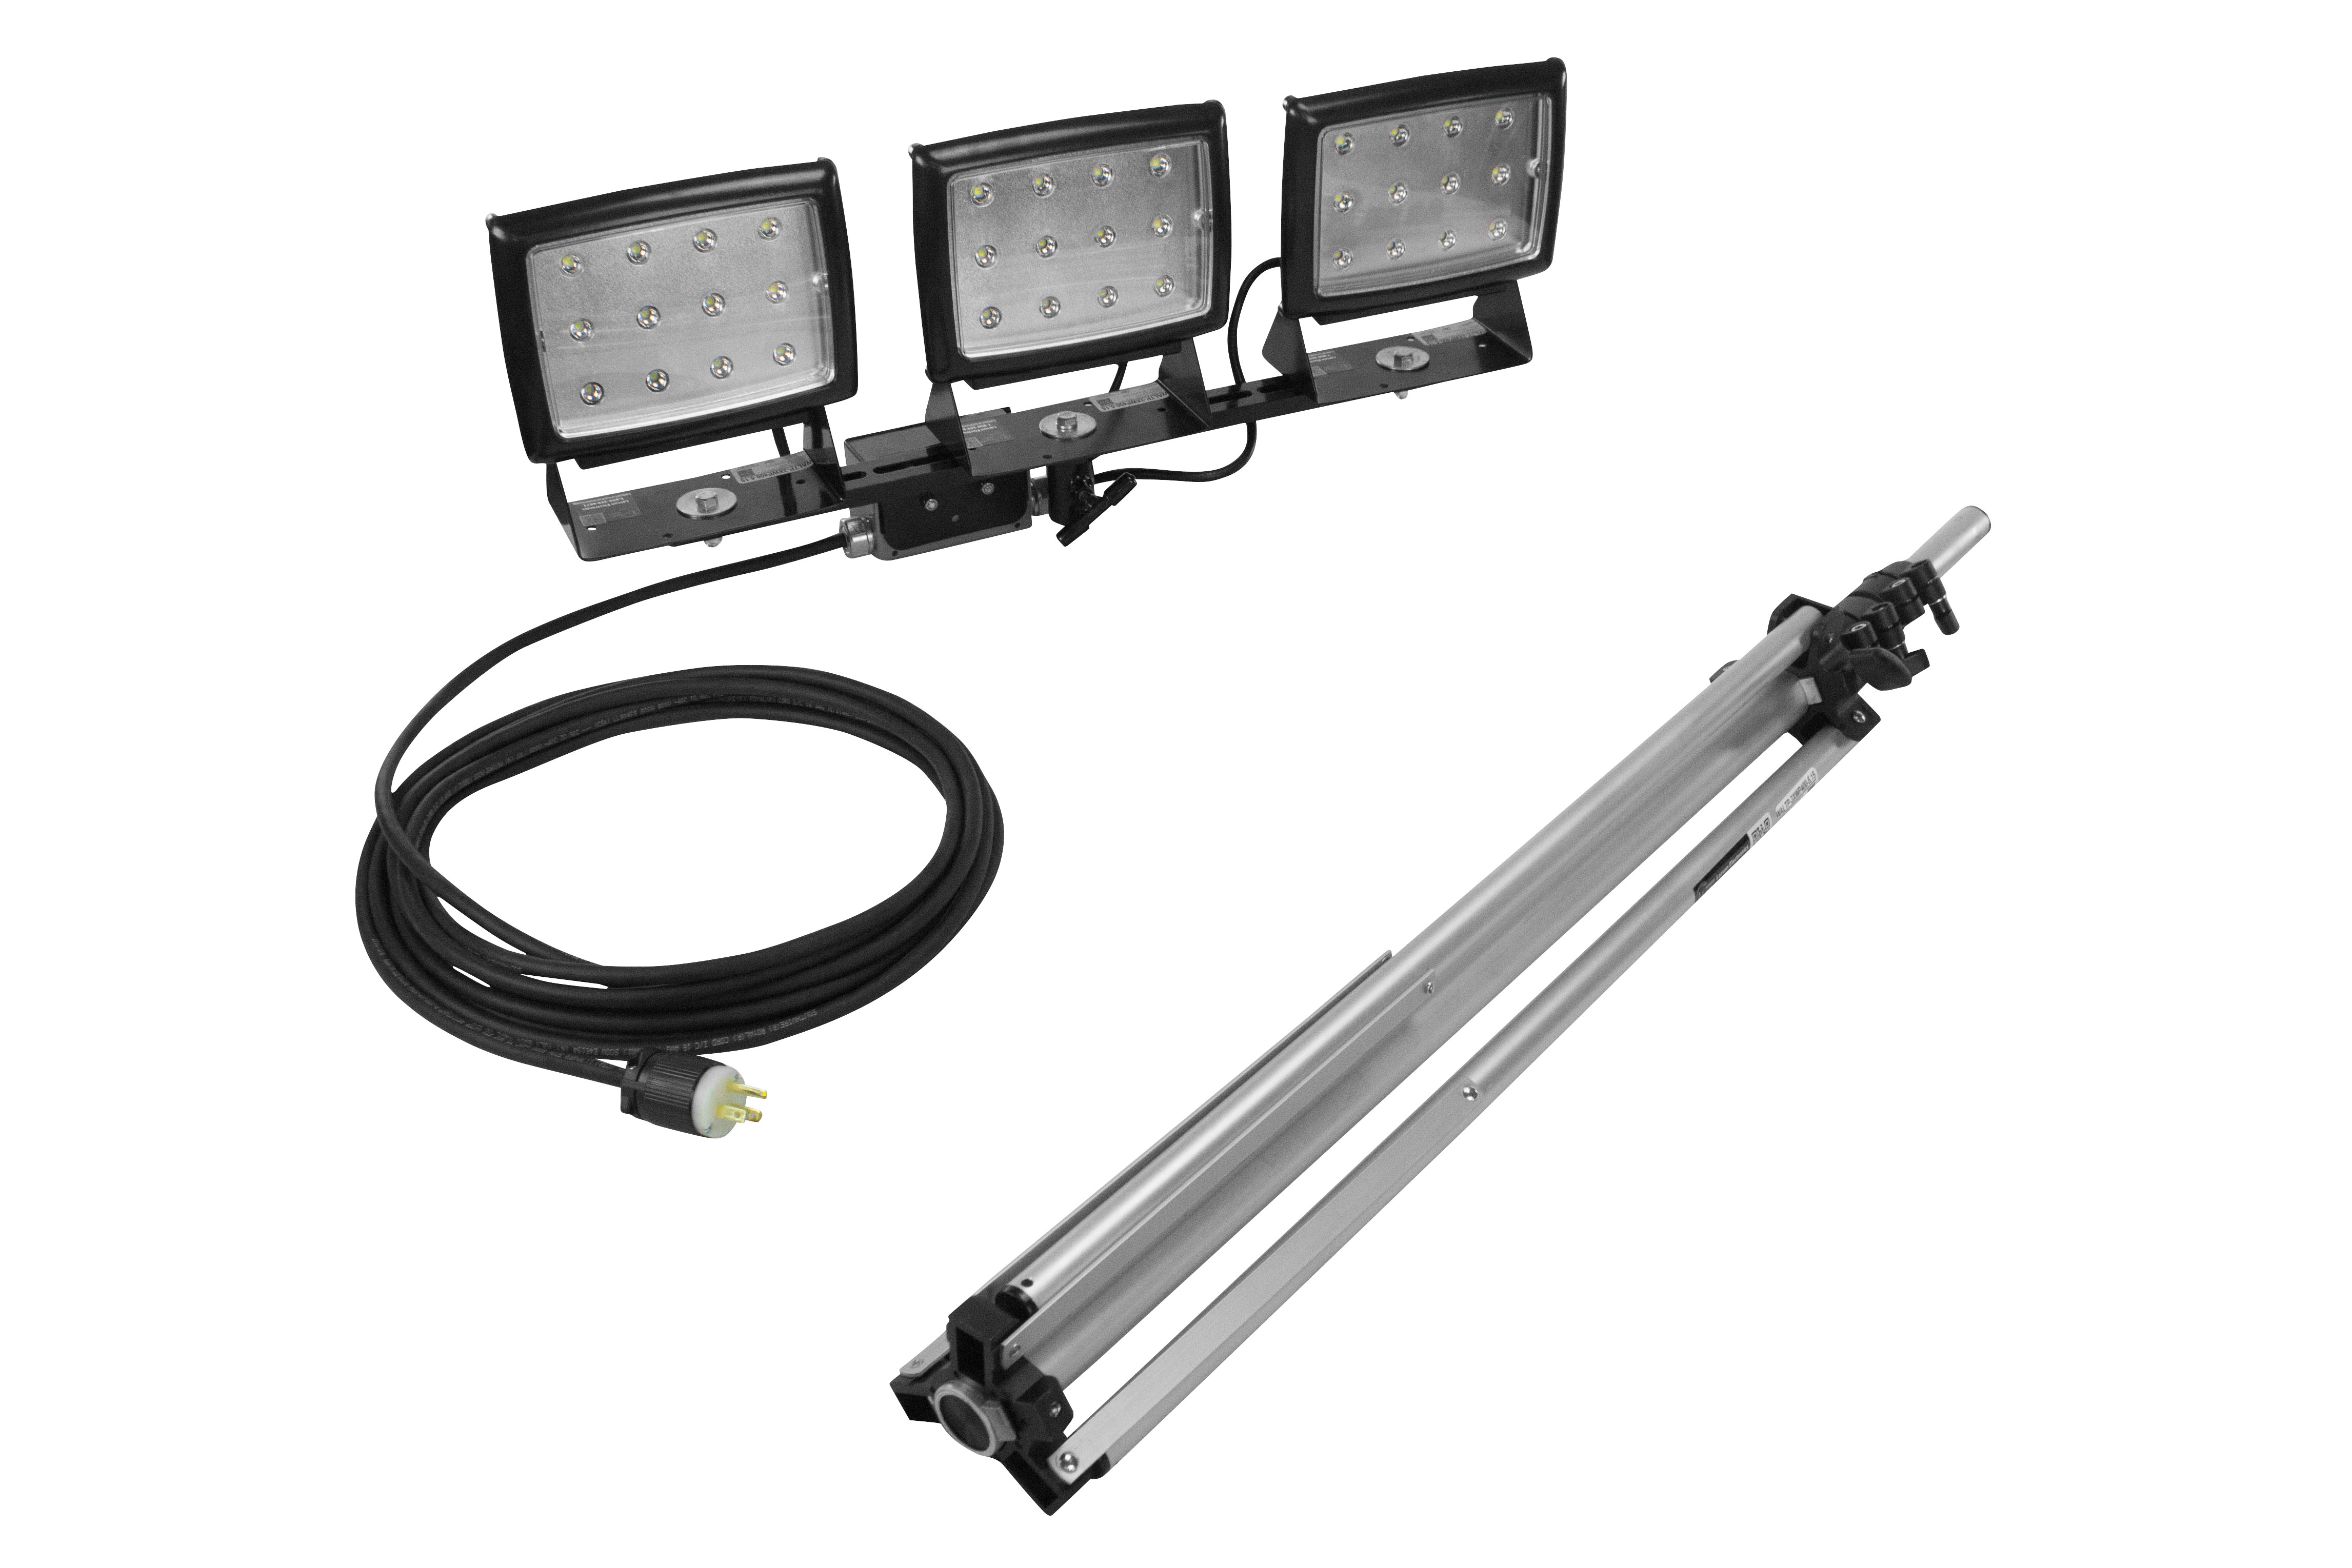 Collapsible Tripod Equipped with Three 40 Watt LED Flood Lights